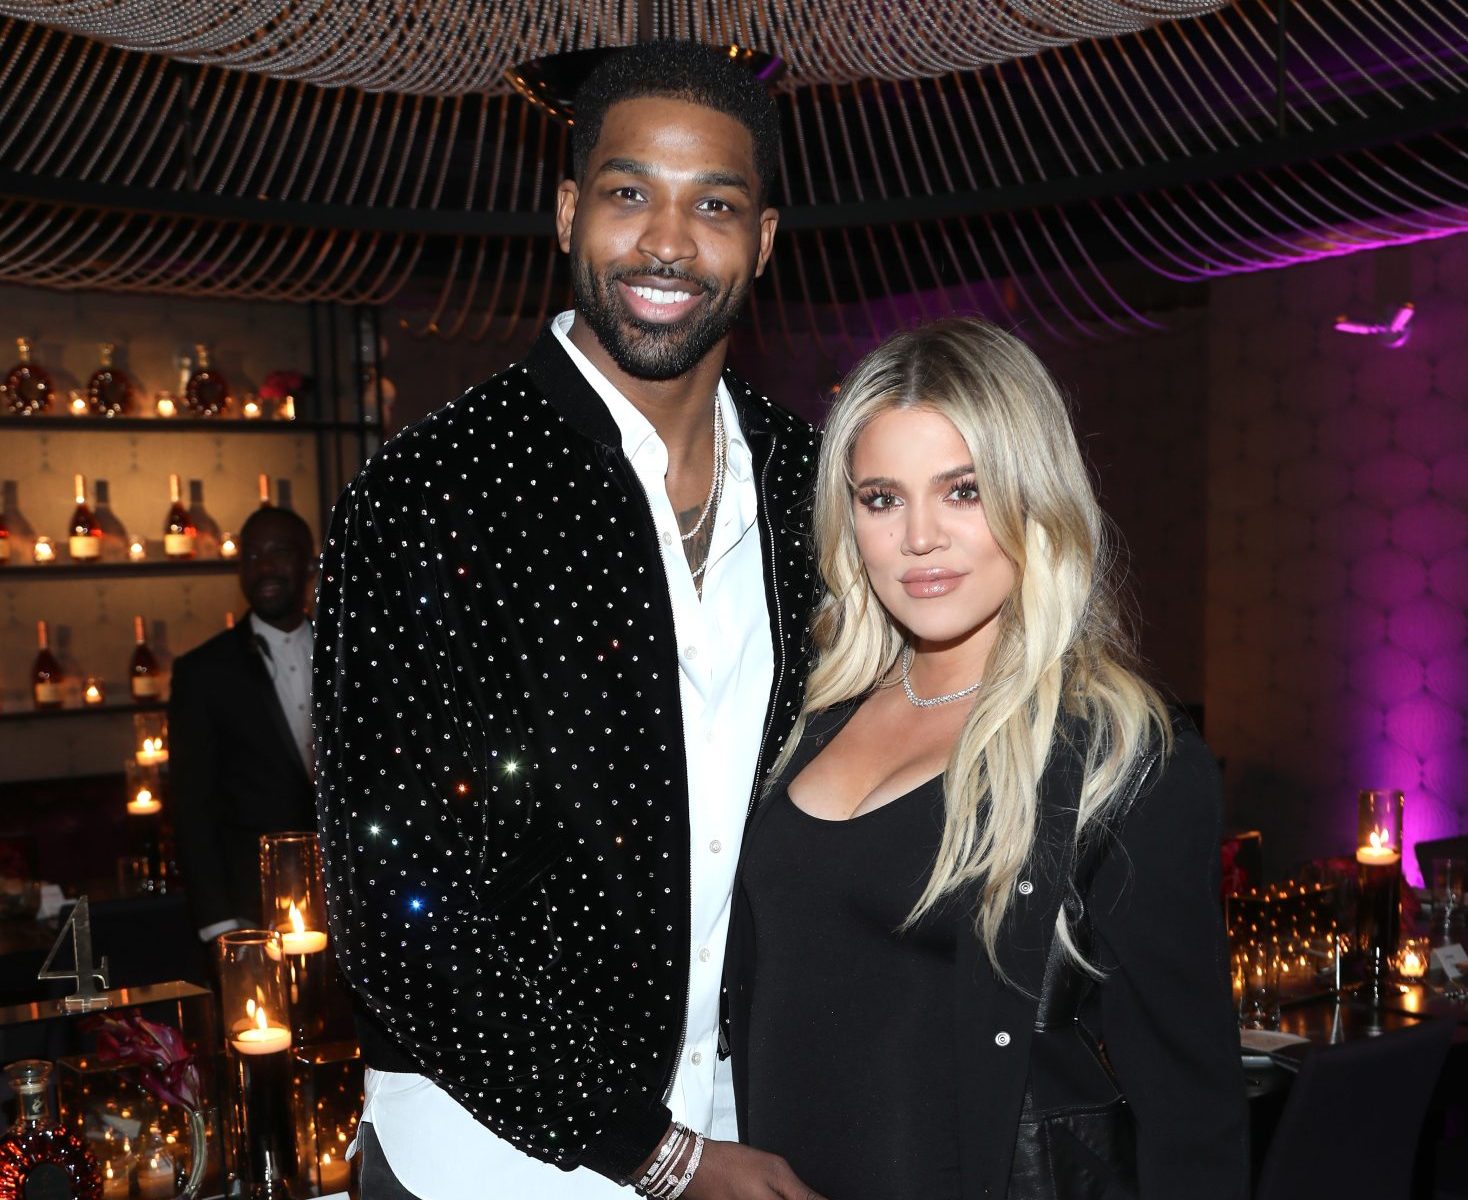 Reps Confirm Khloe Kardashian & Tristan Thompson Are Expecting A Second Child Via Surrogate That Was Conceived Prior To Her Learning About His Child With Maralee Nichols